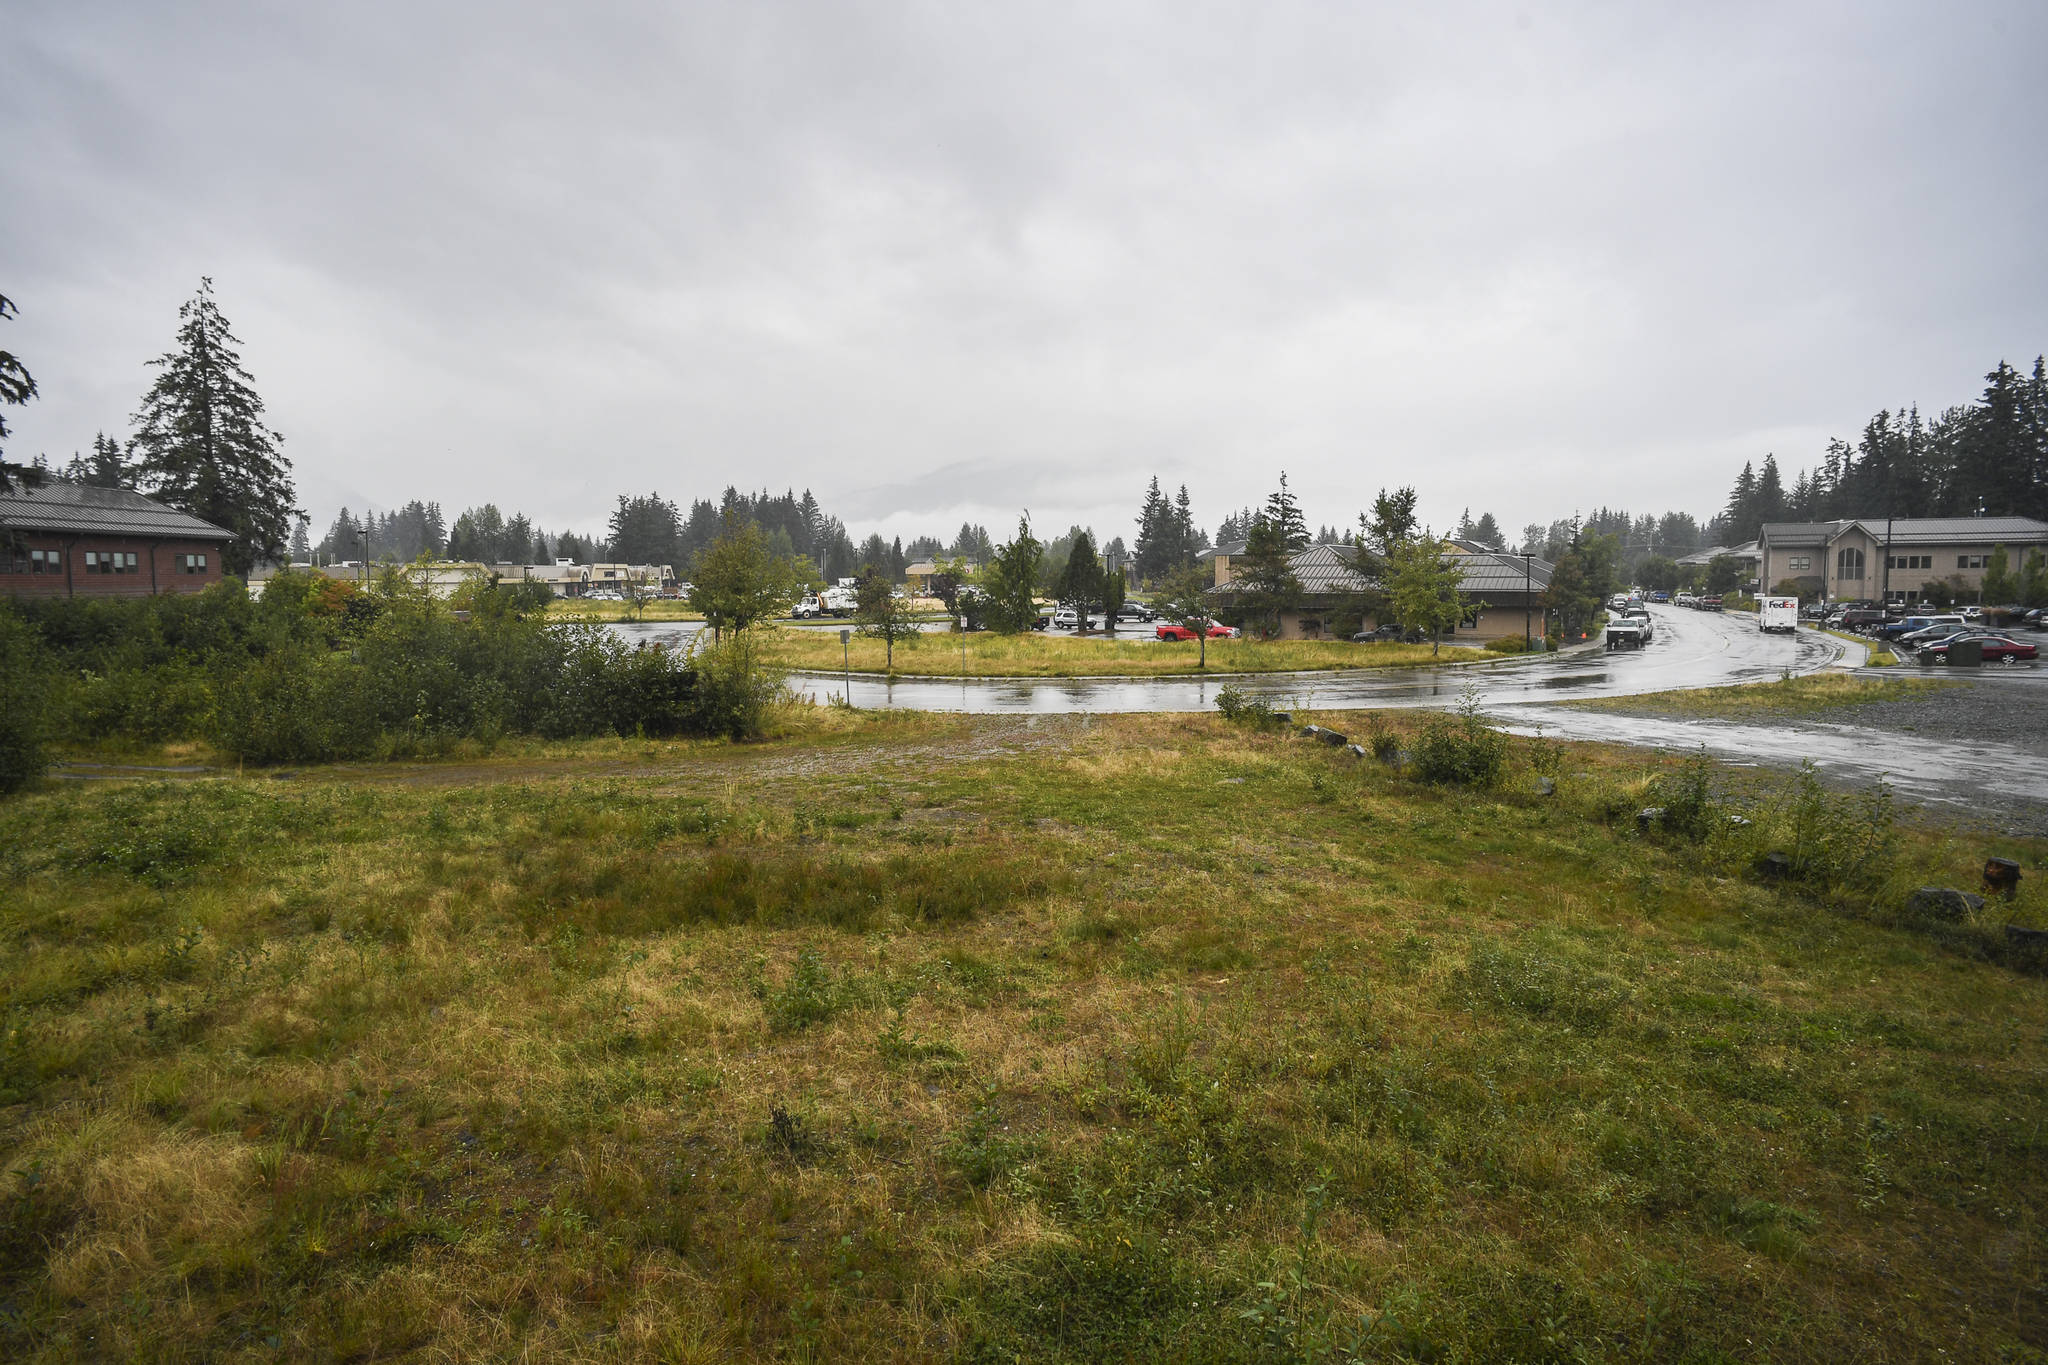 The City and Borough of Juneau has purchased 2.35 acres of land in Vintage Park that will solely be used for senior assisted living. (Michael Penn | Juneau Empire)